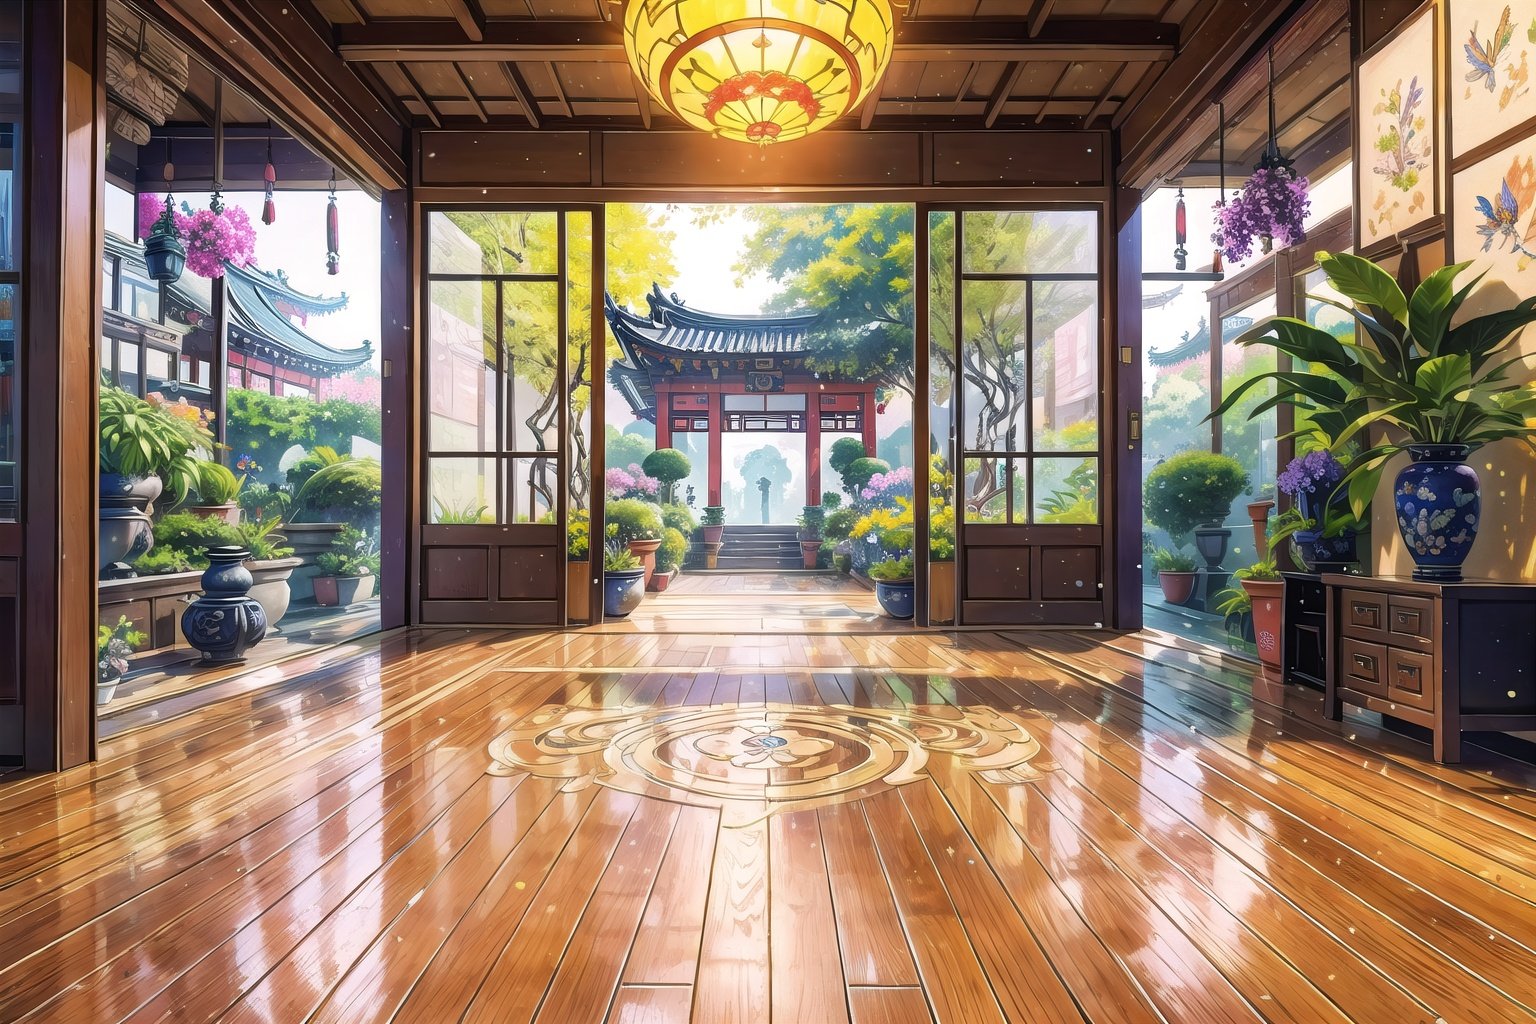 Immerse yourself in a (masterpiece,  best quality,  CGI:1.2) artwork that brings to life a fantastic vortex of colors in a vibrant magical realm,  top quality,  8k,  perfect lighting and composition,  bloom,  (gradients),  rainbow,  indoors,  east asian architecture,  reflective floor,  wooden floor,  human furniture,  (intricate details:1.2),  (glowing flora and fauna:1.2),  creating a whimsical and enchanting atmosphere,  (no humans:1.3),  hatching (texture),  courtyard in background,  (blurry foreground:1.1),  deep depth of field,  floating particles, <lora:EMS-36517-EMS:0.000000>